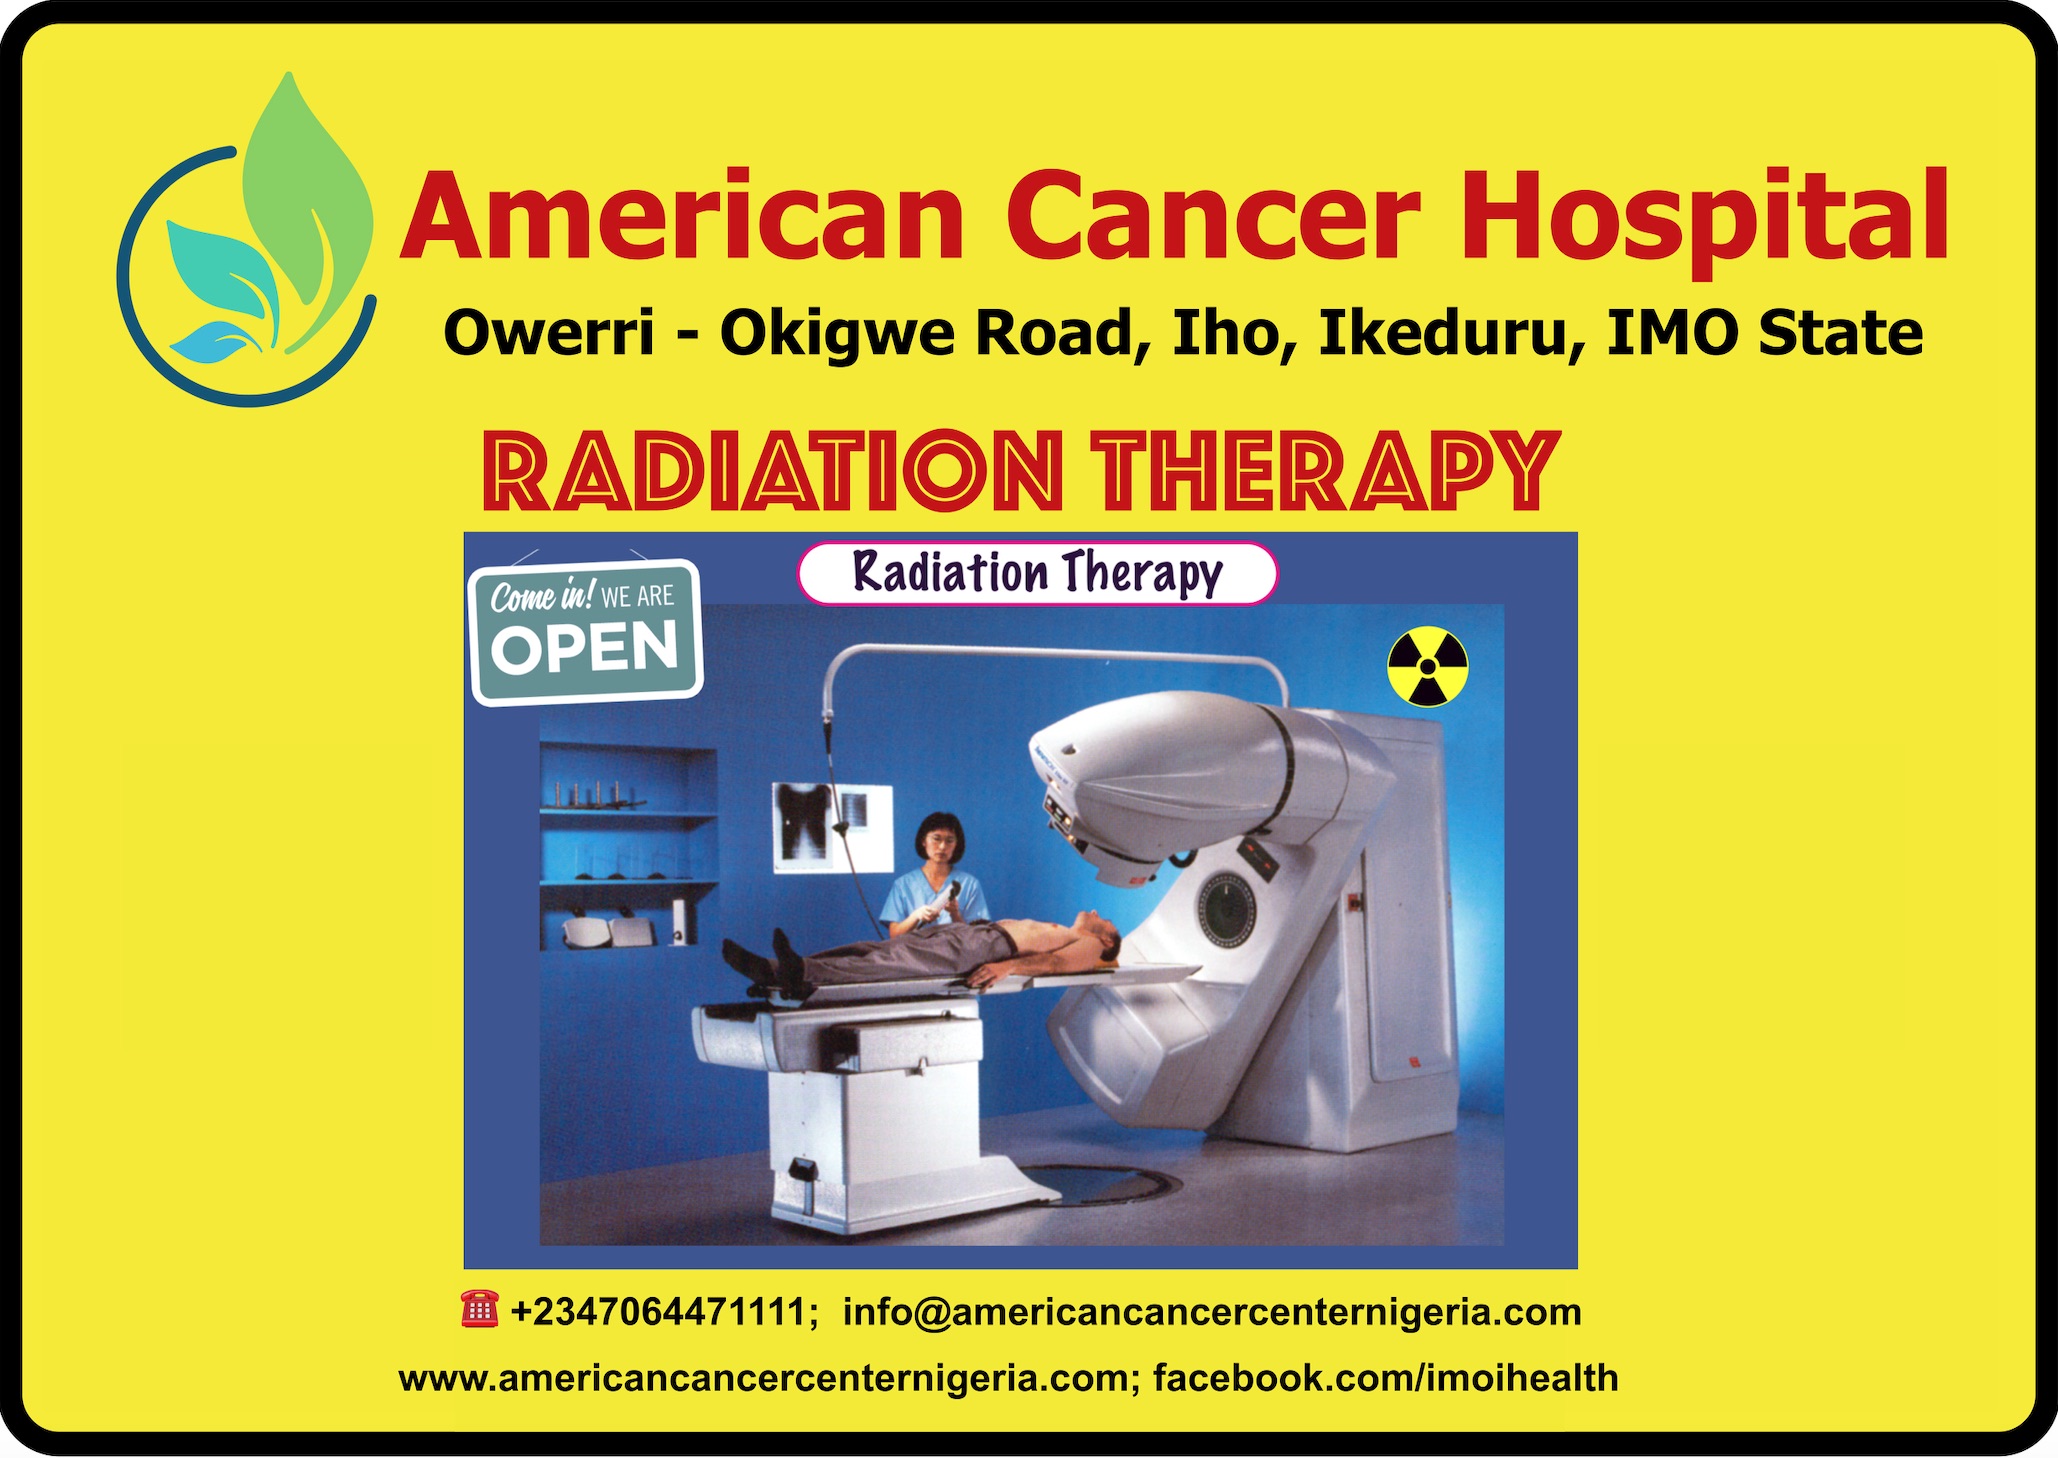 RADIATION THERAPY AVAILABLE